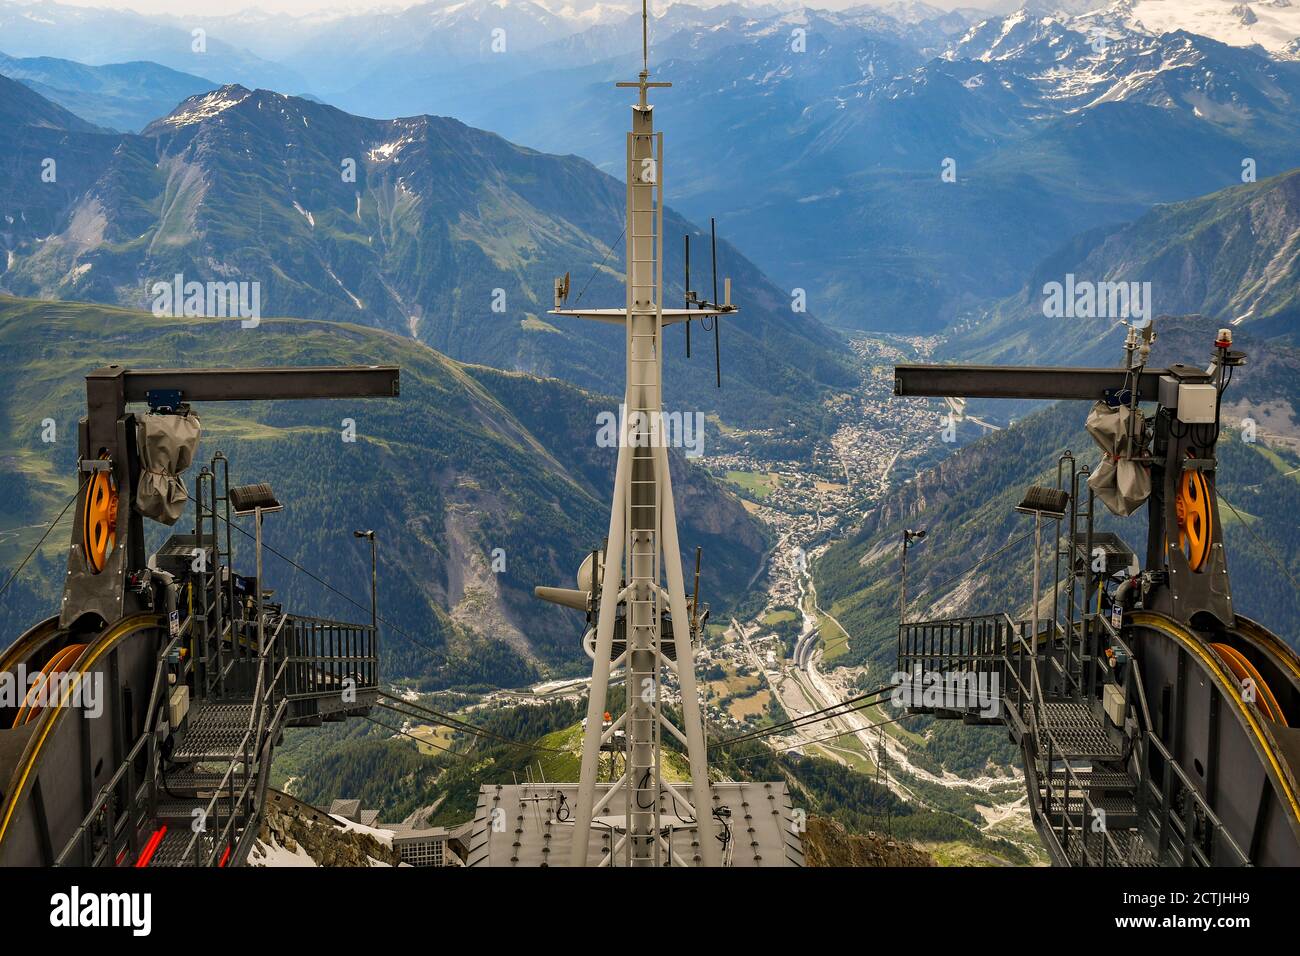 Top of the engineering mechanism of Pointe Helbronner station of the Skyway Monte Bianco cableway above the valley of Courmayeur, Aosta, Italy Stock Photo